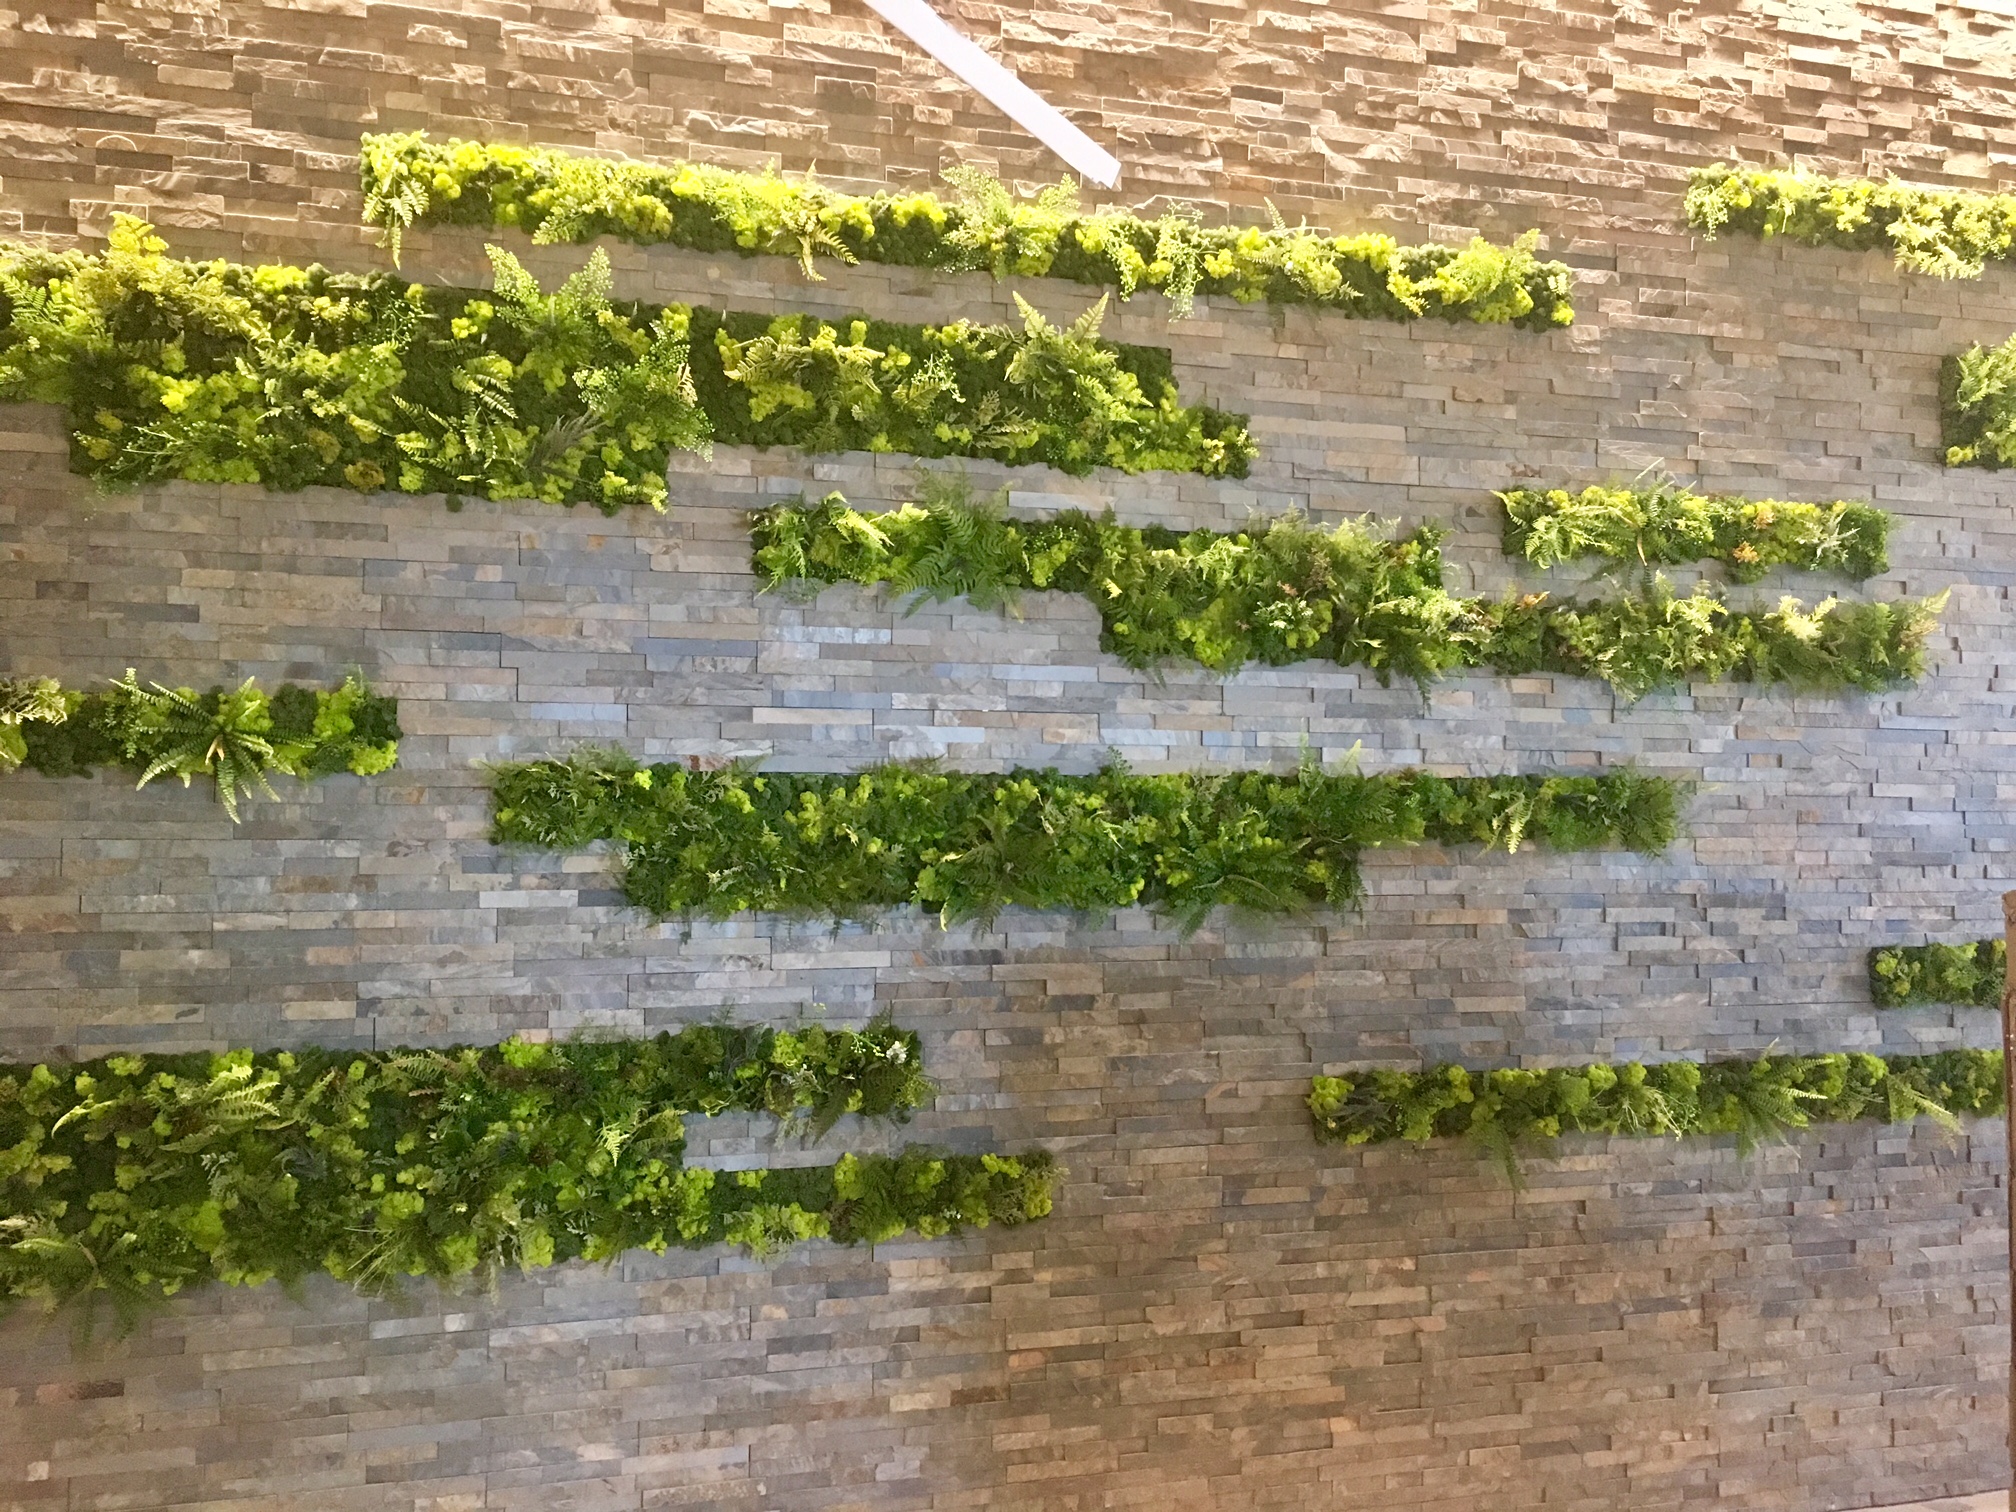 Good Earth Plant Company has so many innovative ways to add plants to your interior design today, including spectacular moss walls.